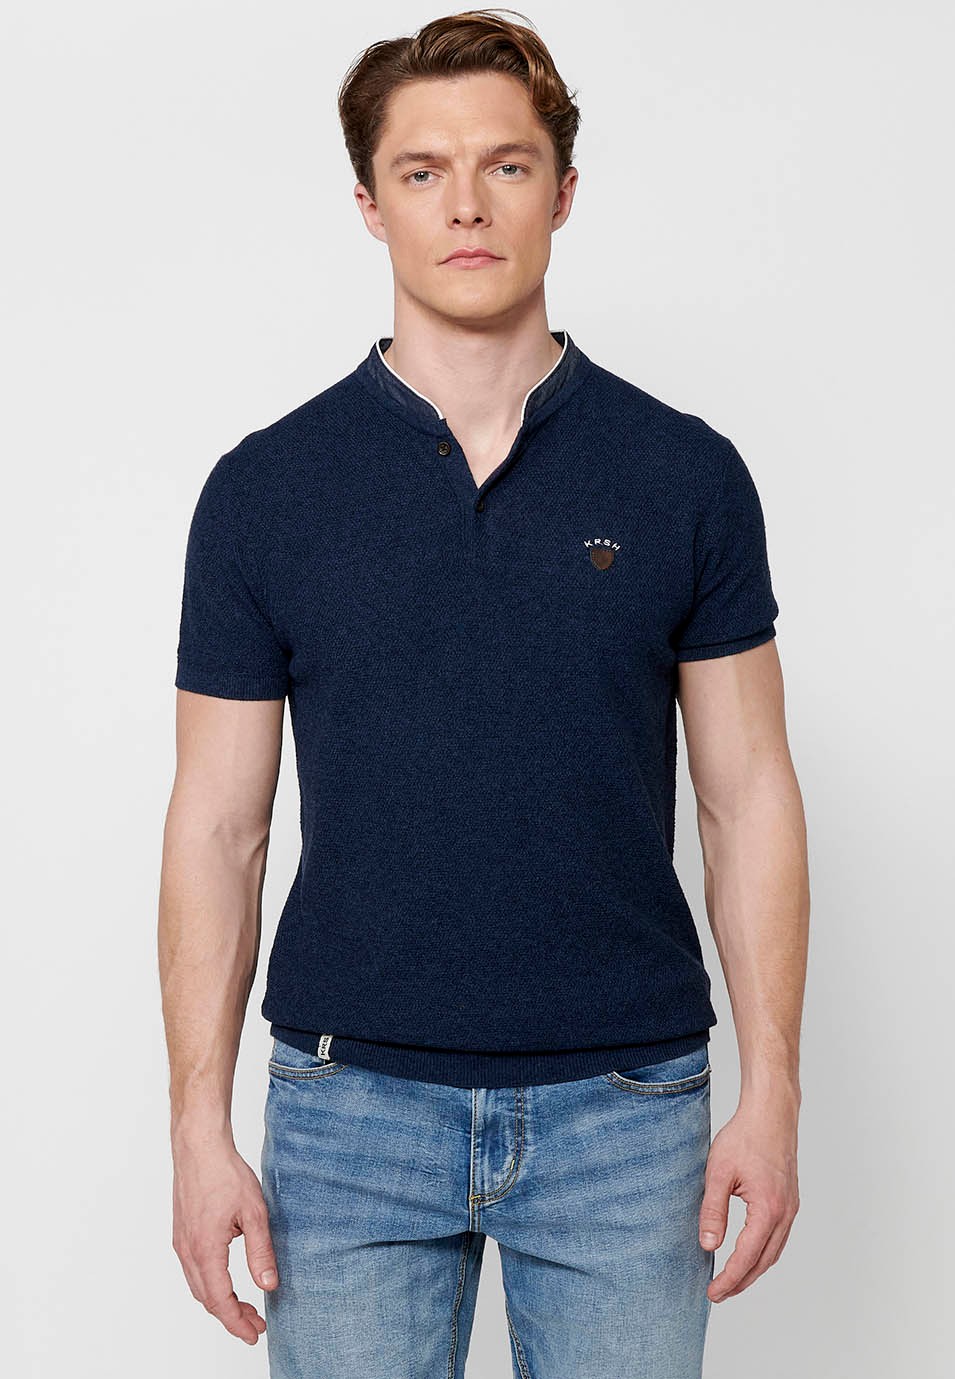 Short Sleeve Cotton Polo Shirt with Round Neck with Buttoned Opening and Textured Navy Color for Men